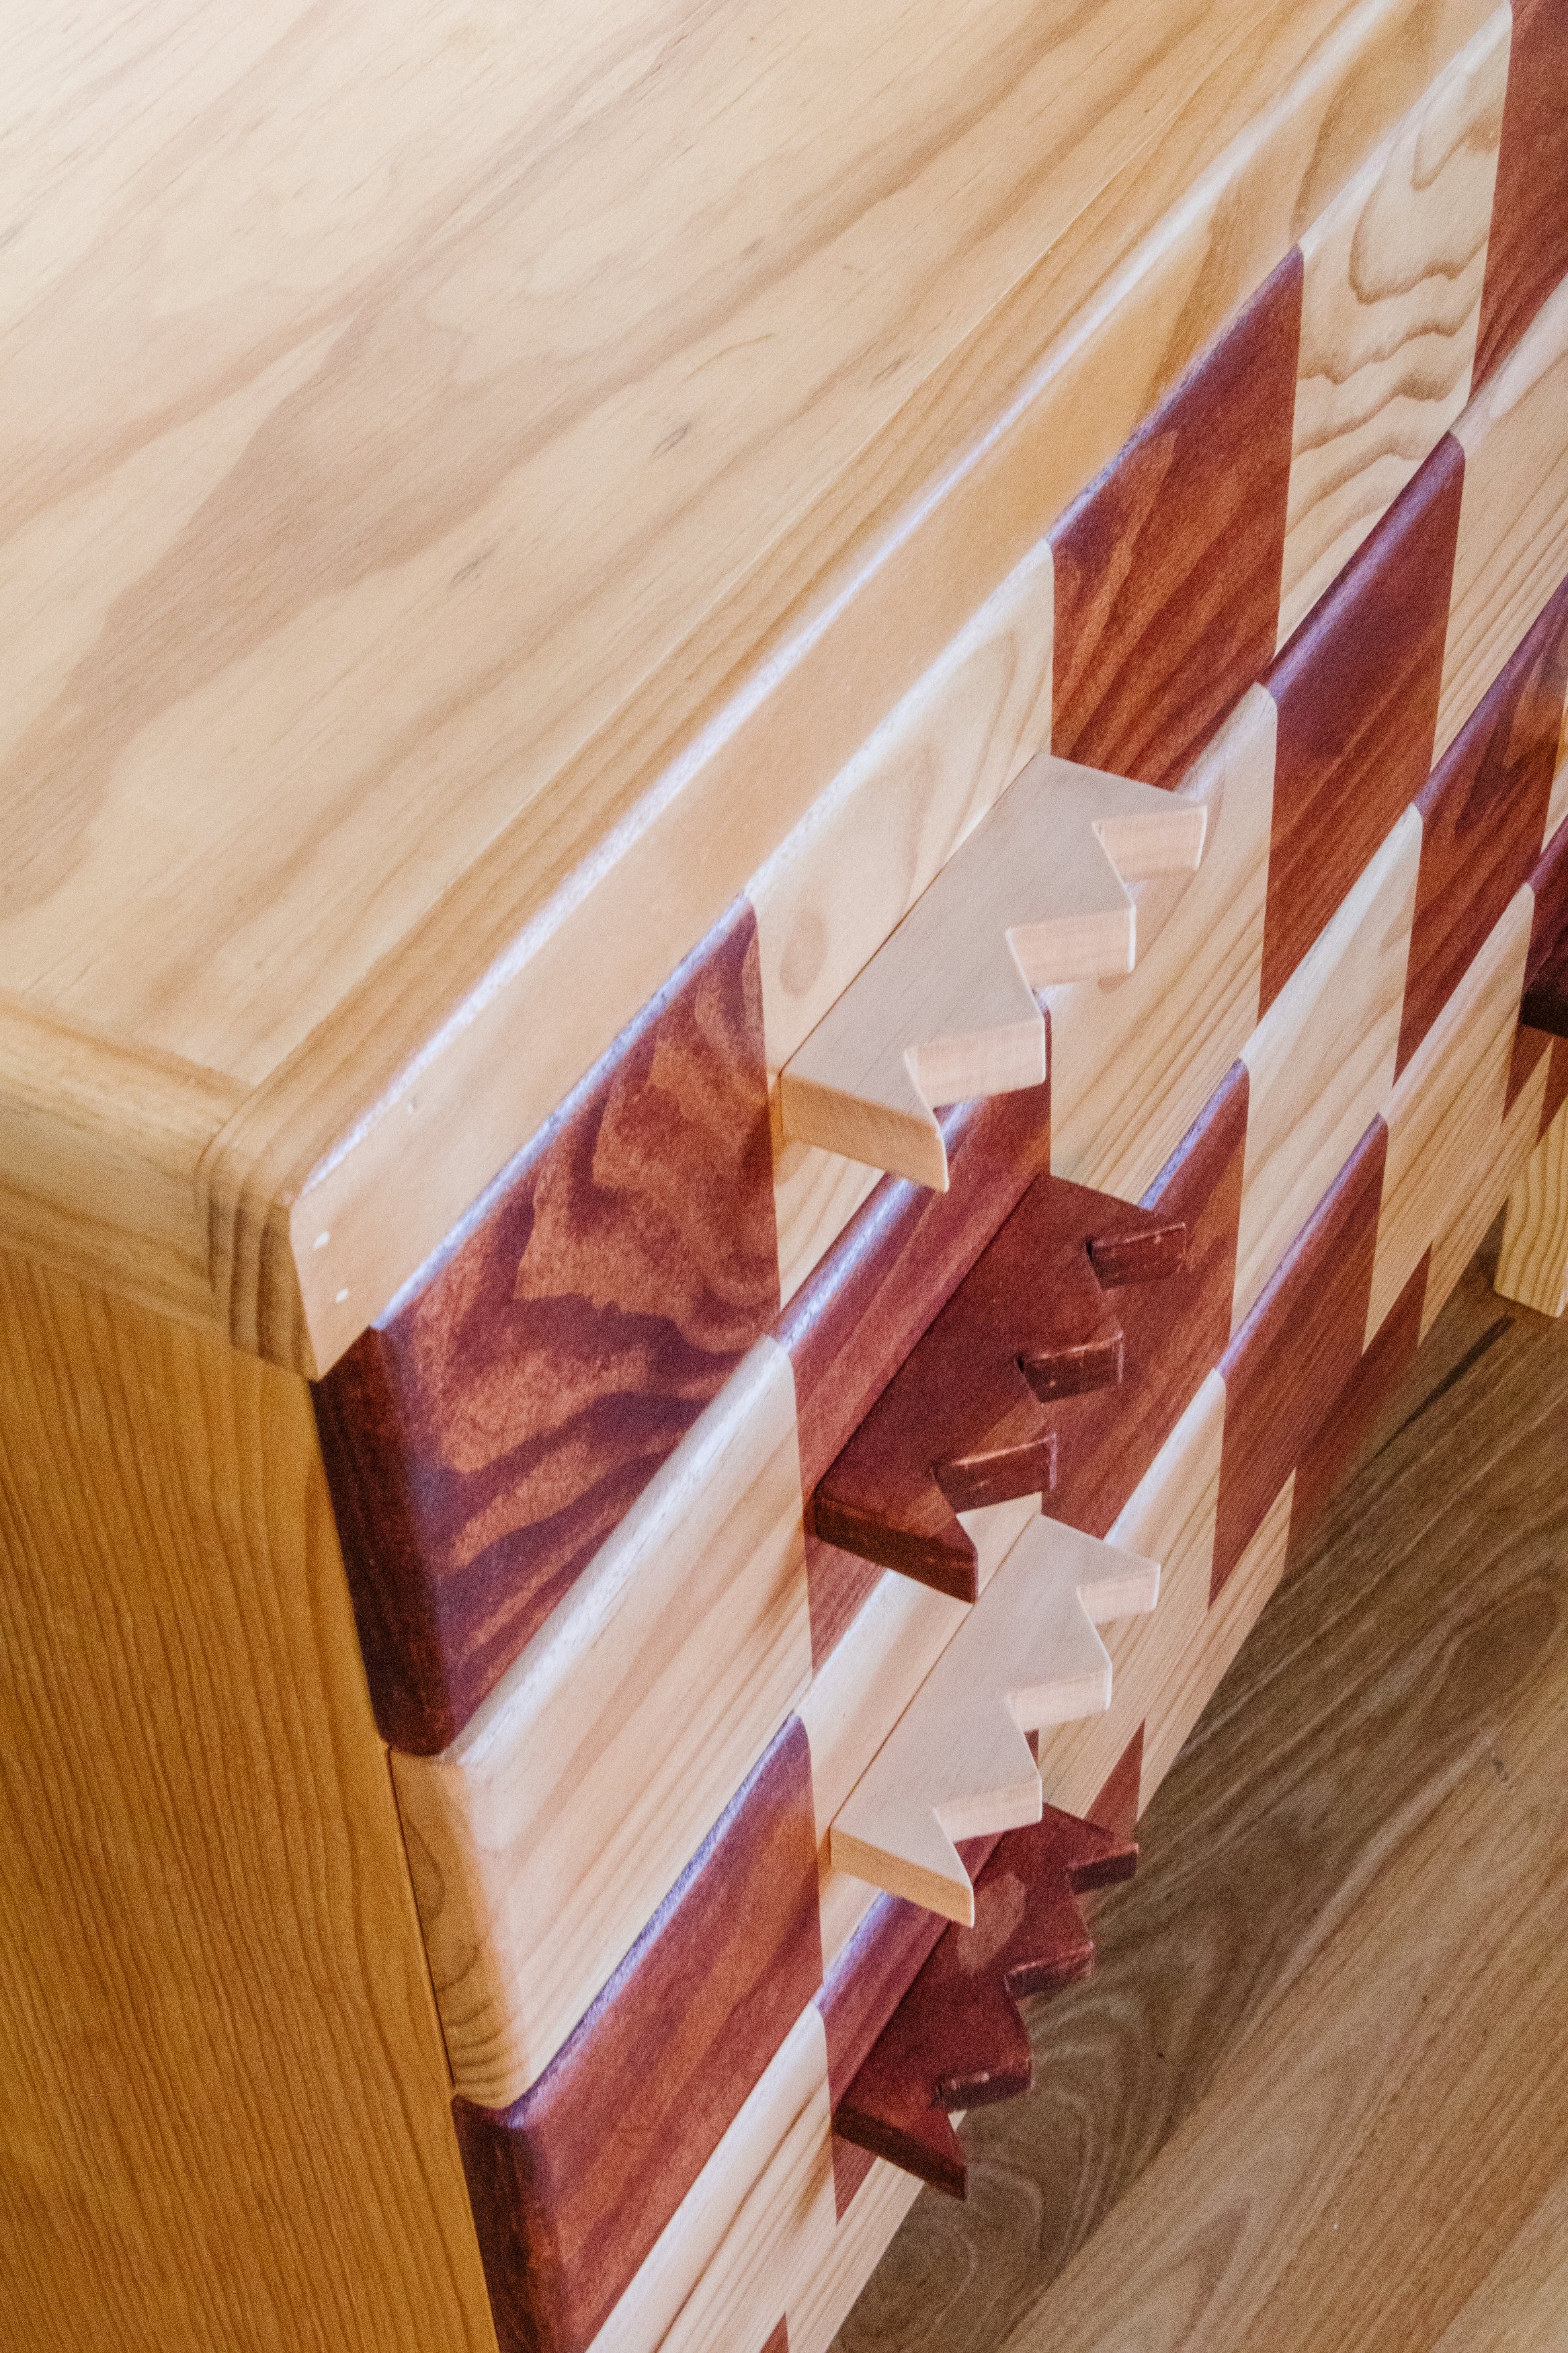 Upcycled Timber Stained Checker Drawers (13 of 79).jpg